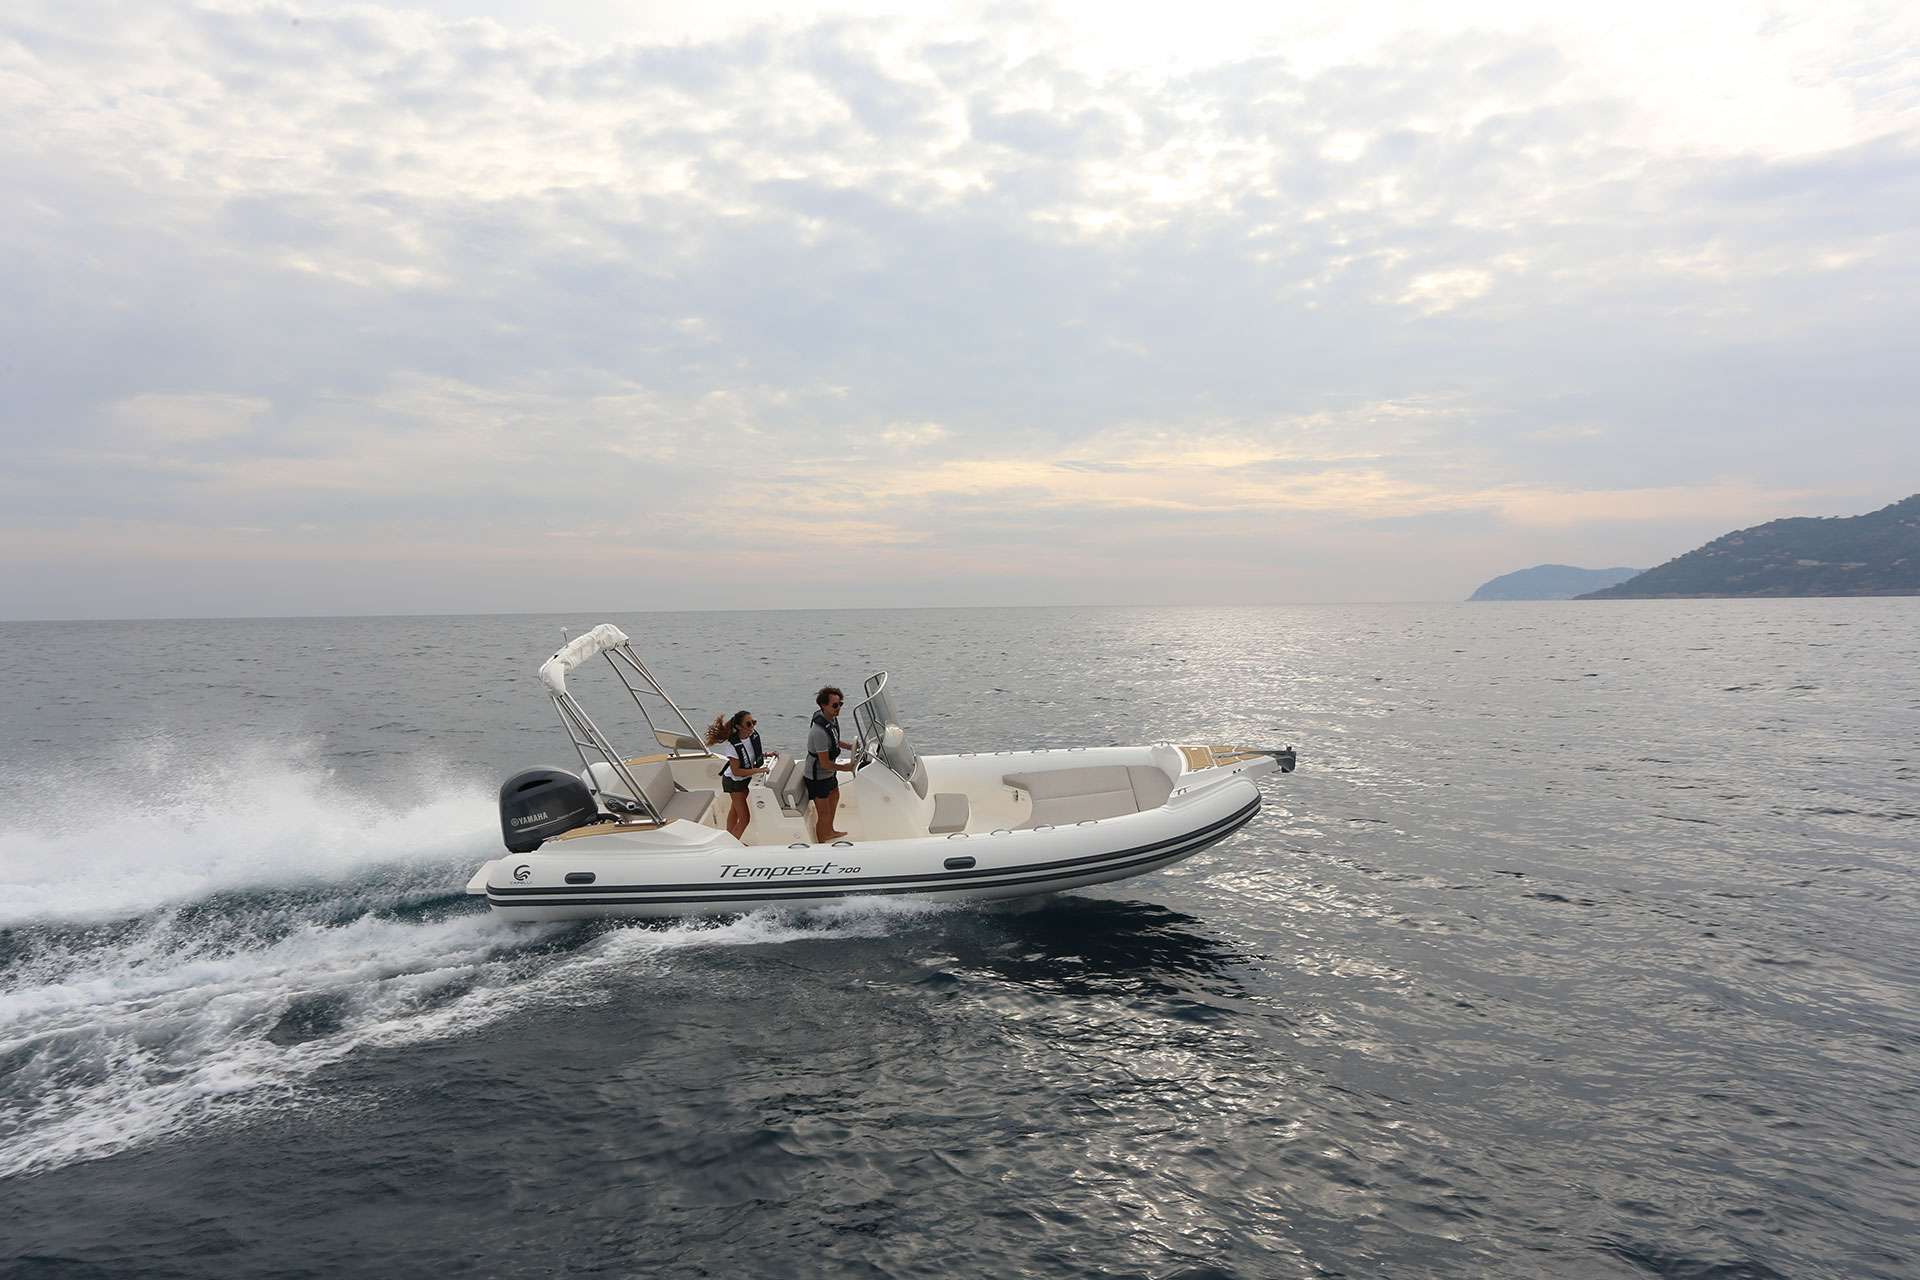 Tempest 700 Sun - Yacht Charter Cogolin & Boat hire in France French Riviera St. Tropez Saint Tropez 1